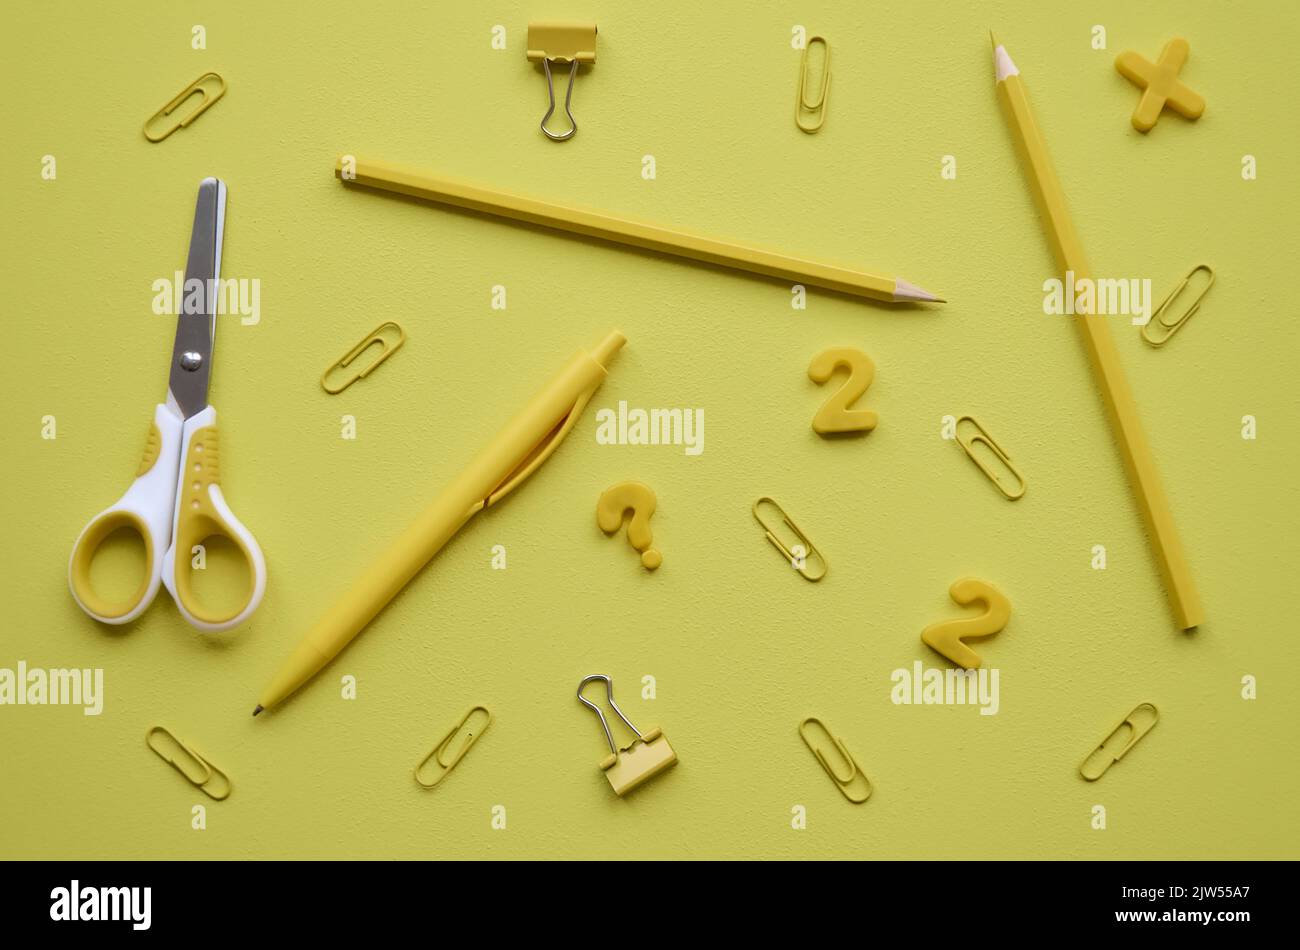 School stationery products on yellow background, flatlay. Back to school Stock Photo